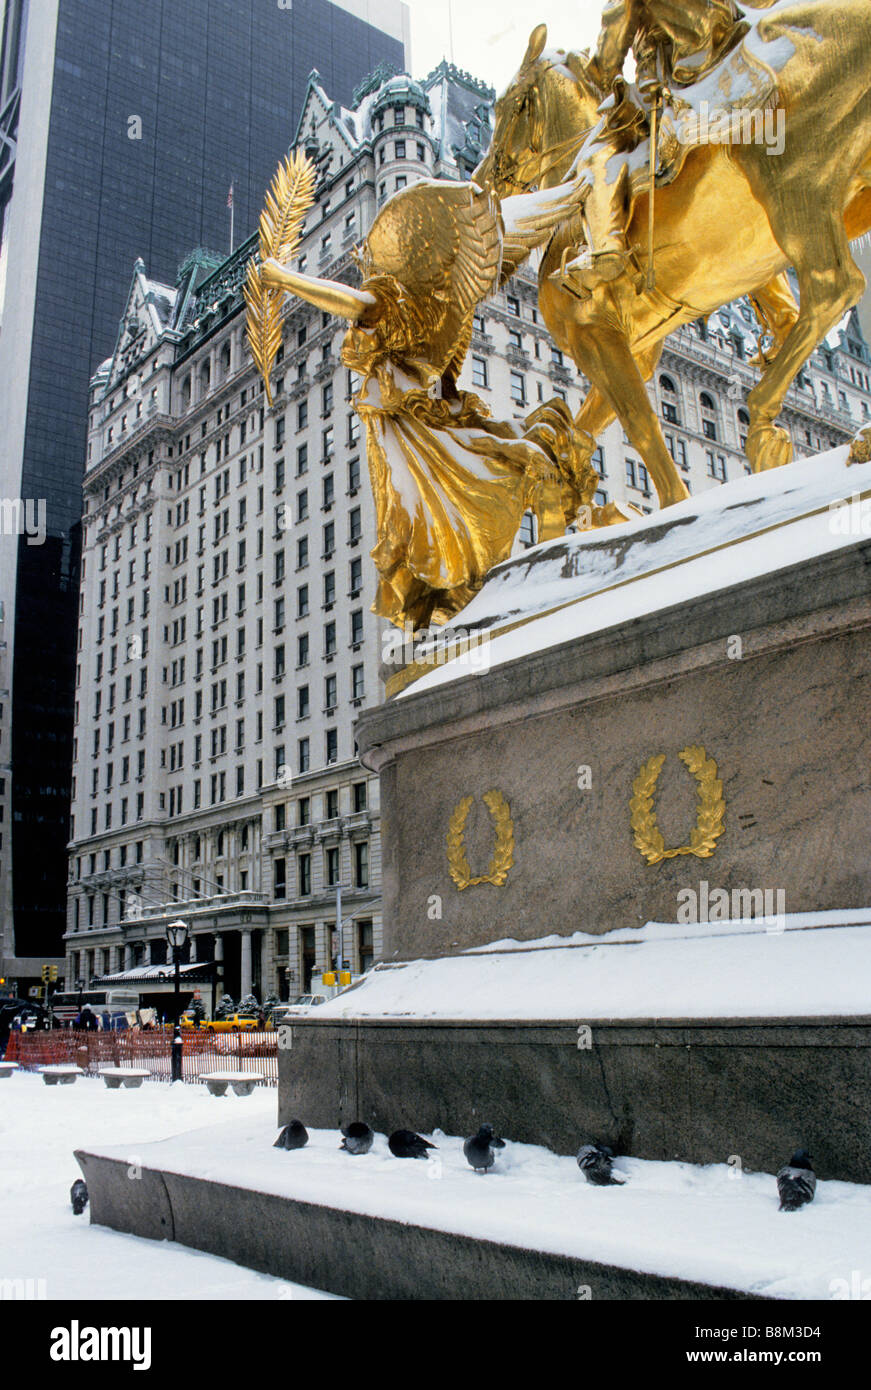 The Plaza Hotel,  New York City, 5th Avenue. General George Tecumseh Sherman equestrian monument on the Grand Army Plaza. New York winter snow scene Stock Photo